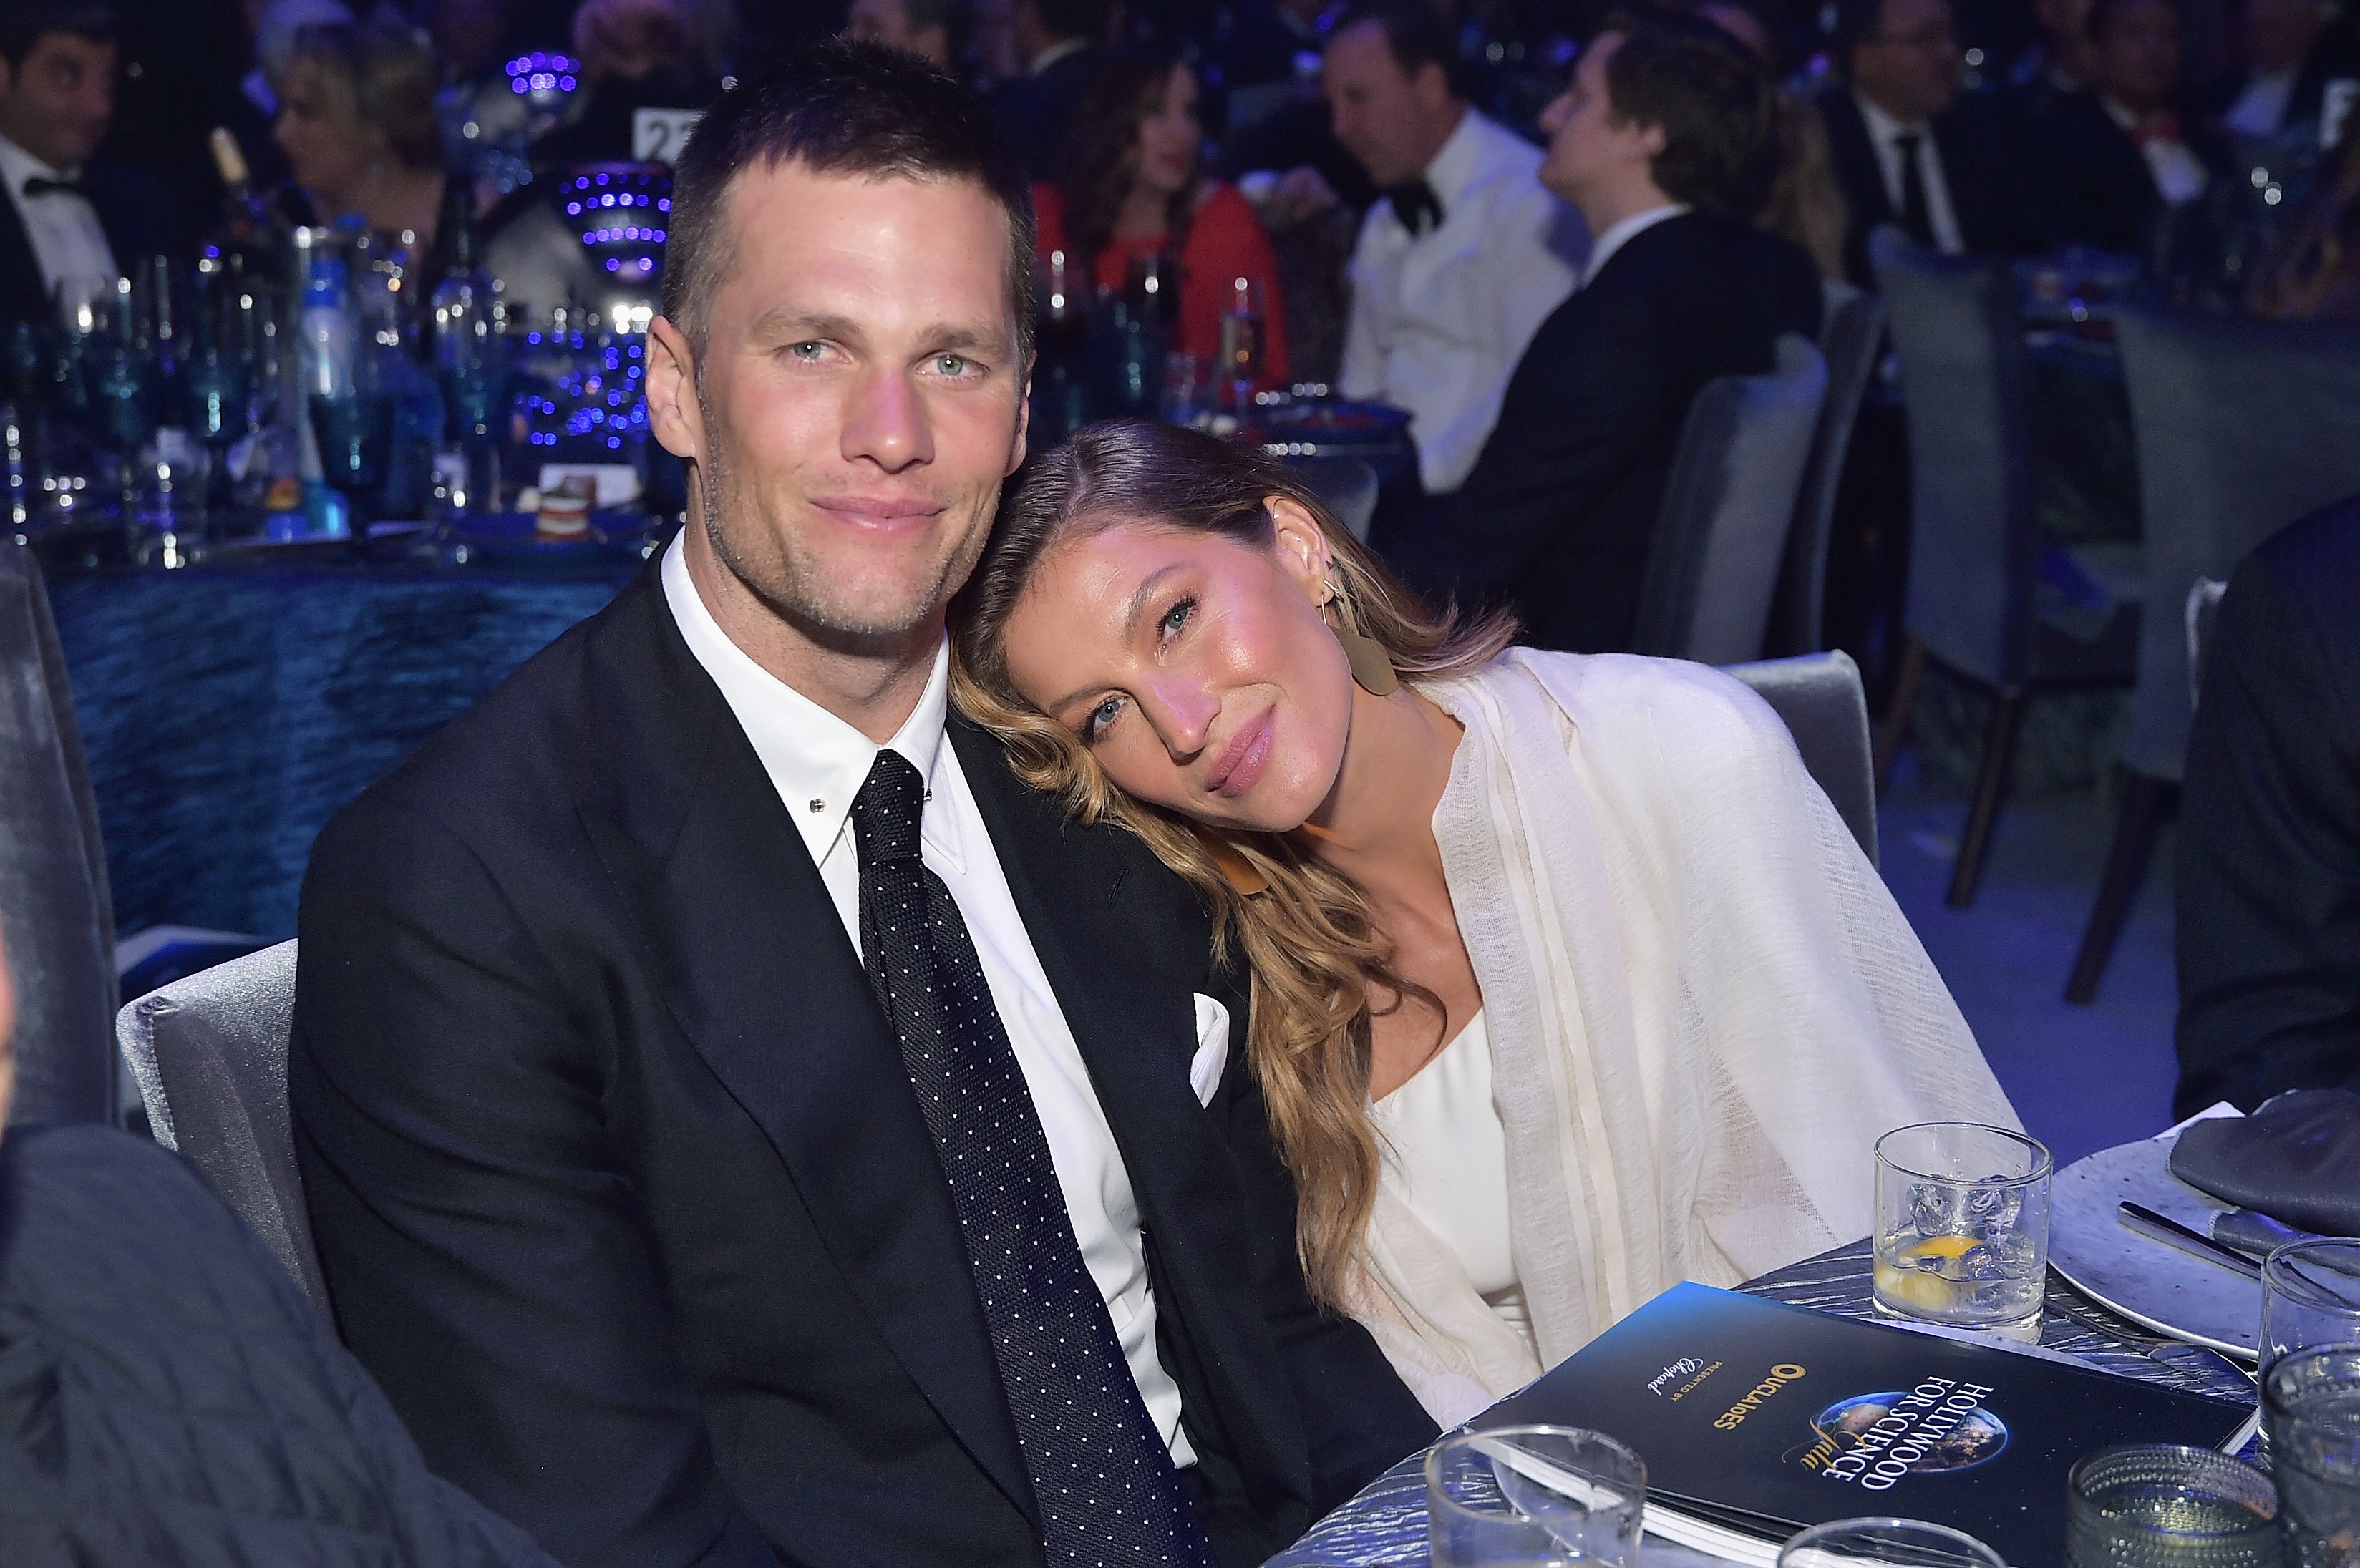 Tom Brady and Giselle Bundchen smile and sit next to eat other at an event.